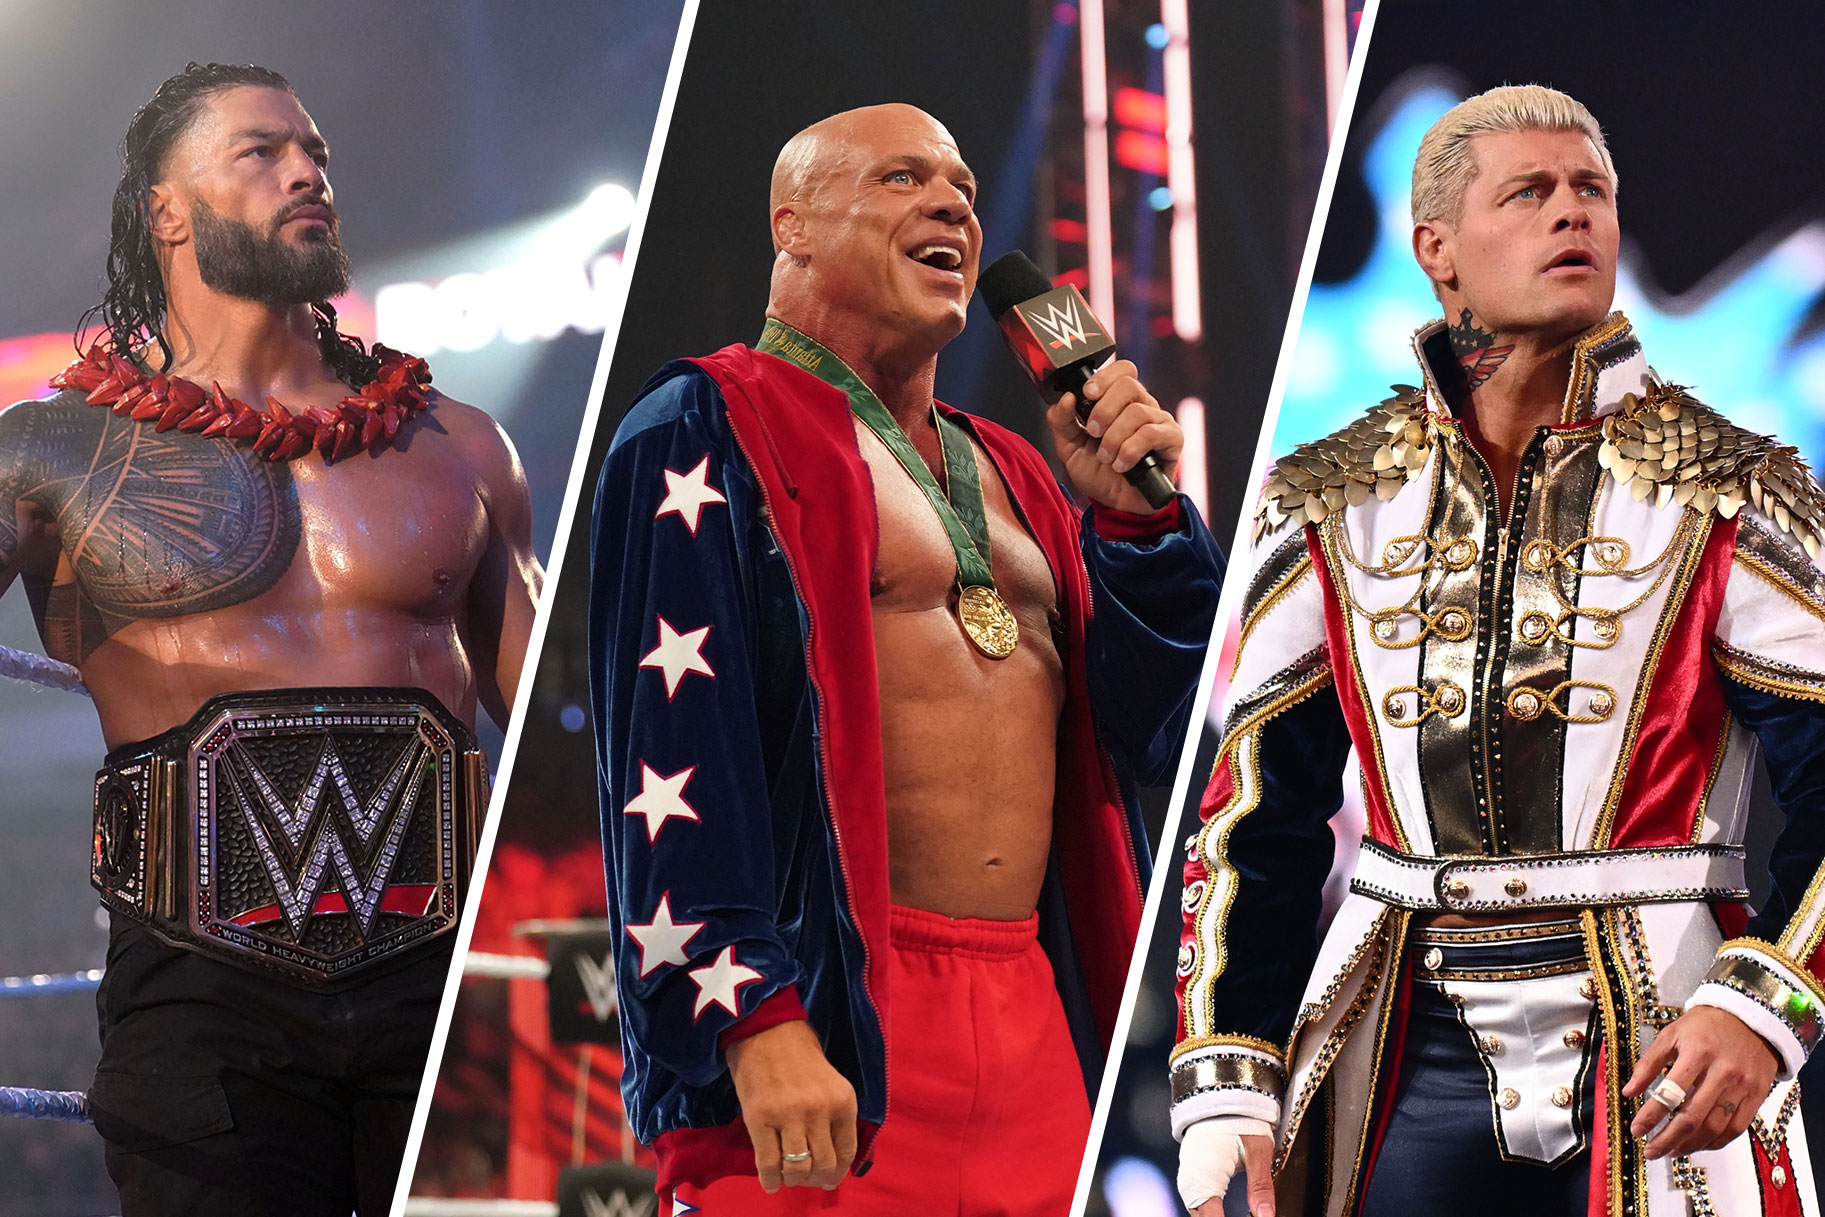 Kurt Angle Replaces Roman Reigns at TLC - A Look Back at Their Wrestling Careers 13